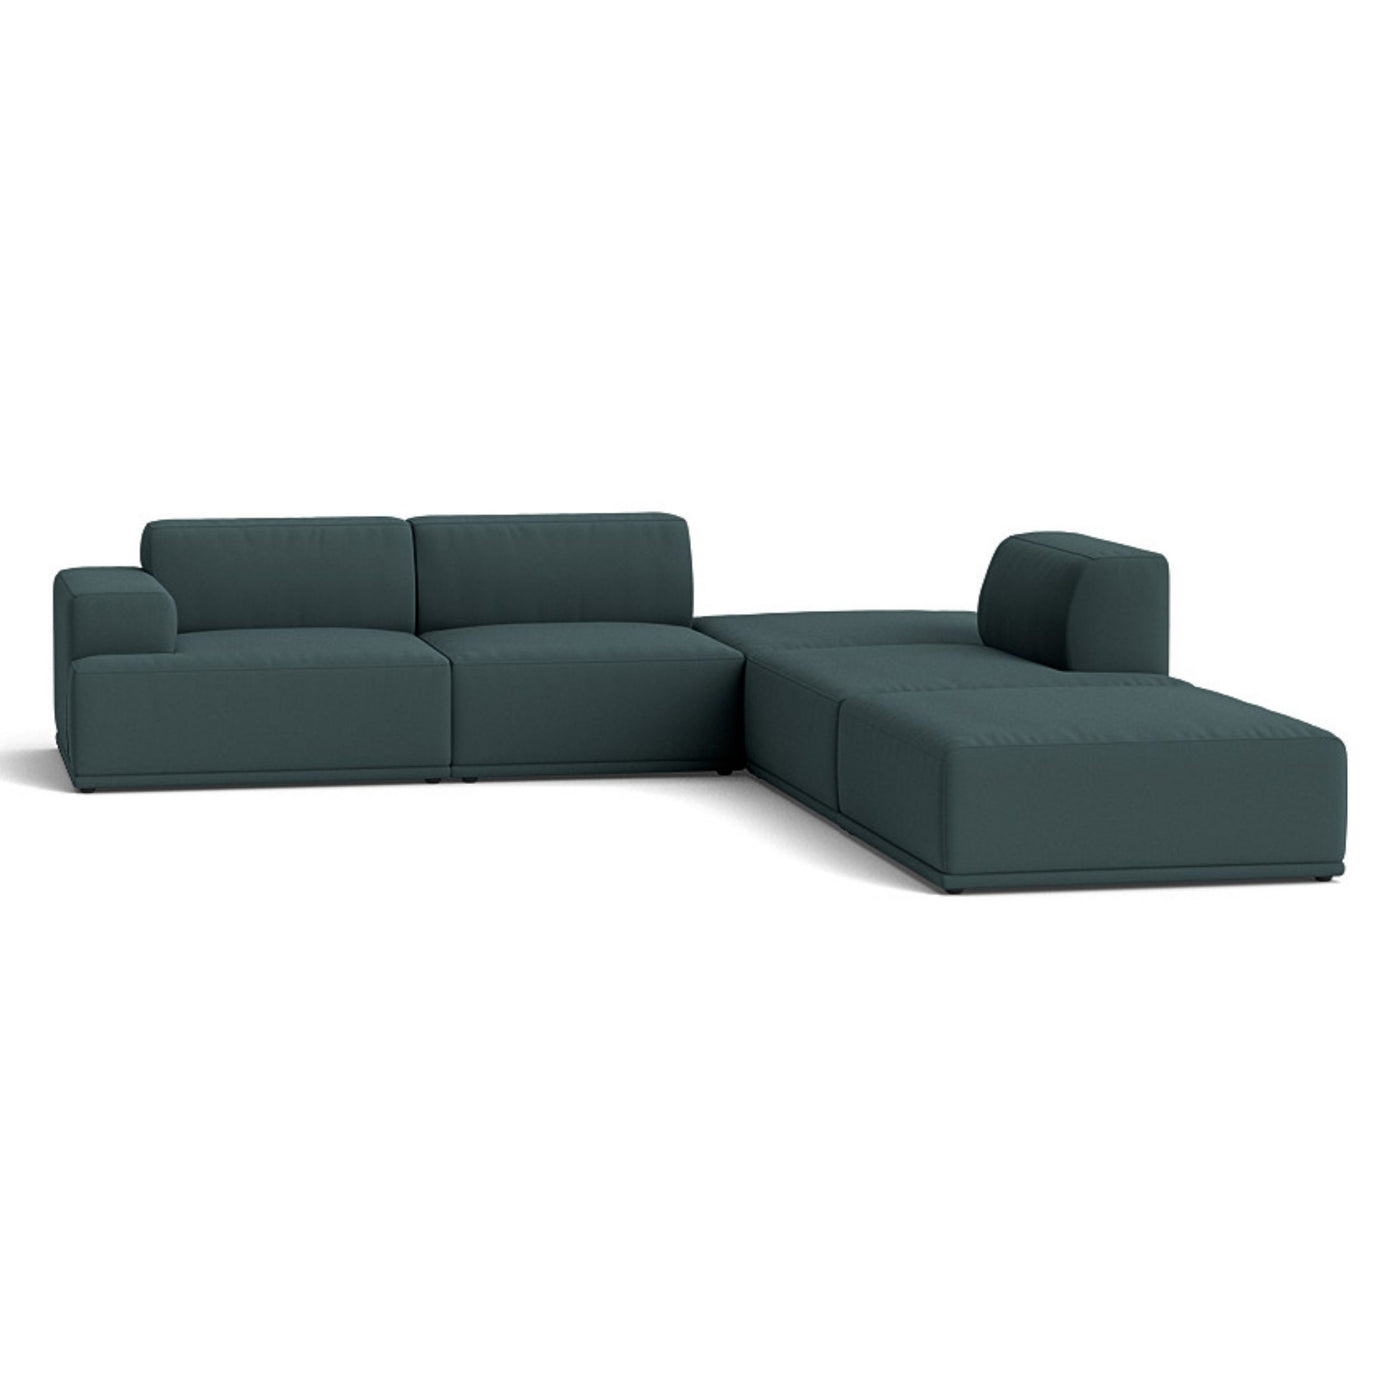 Muuto Connect Soft Modular Corner Sofa, configuration 3. made-to-order from someday designs. #colour_steelcut-180